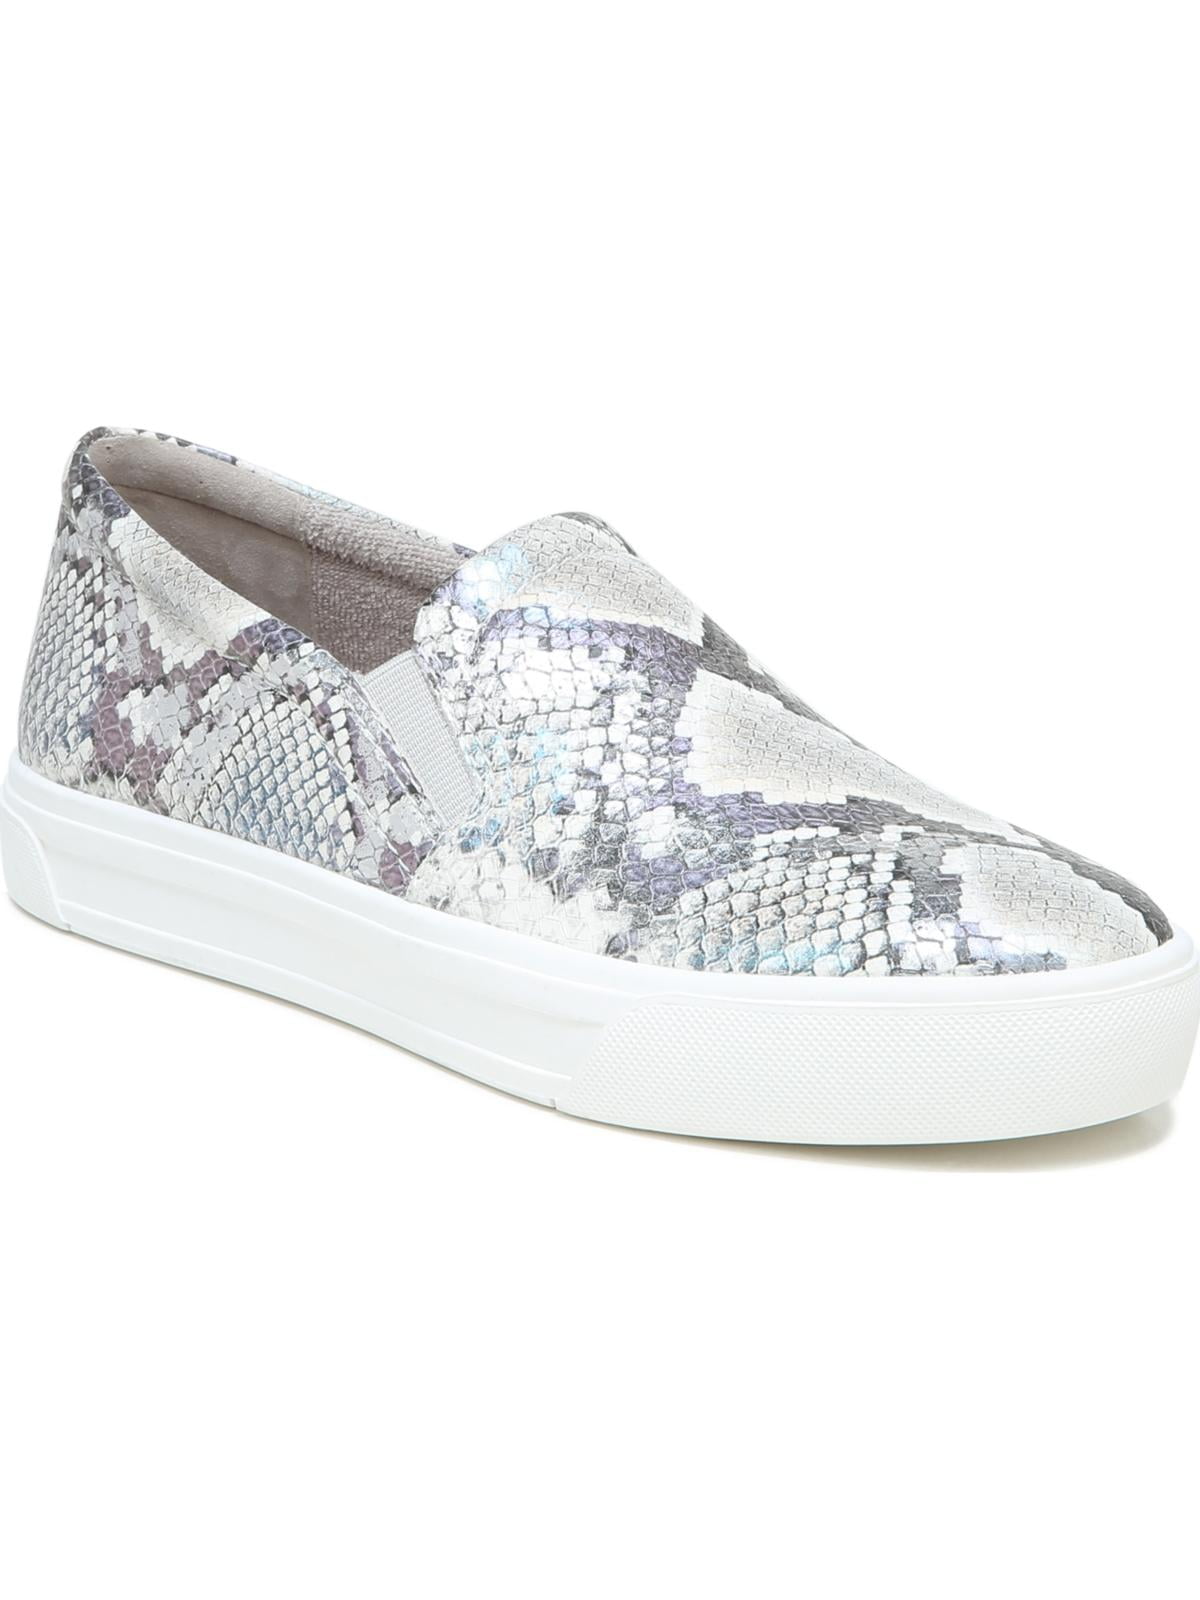 Naturalizer Womens Aileen Leather Snake Print Slip-On Sneakers ...